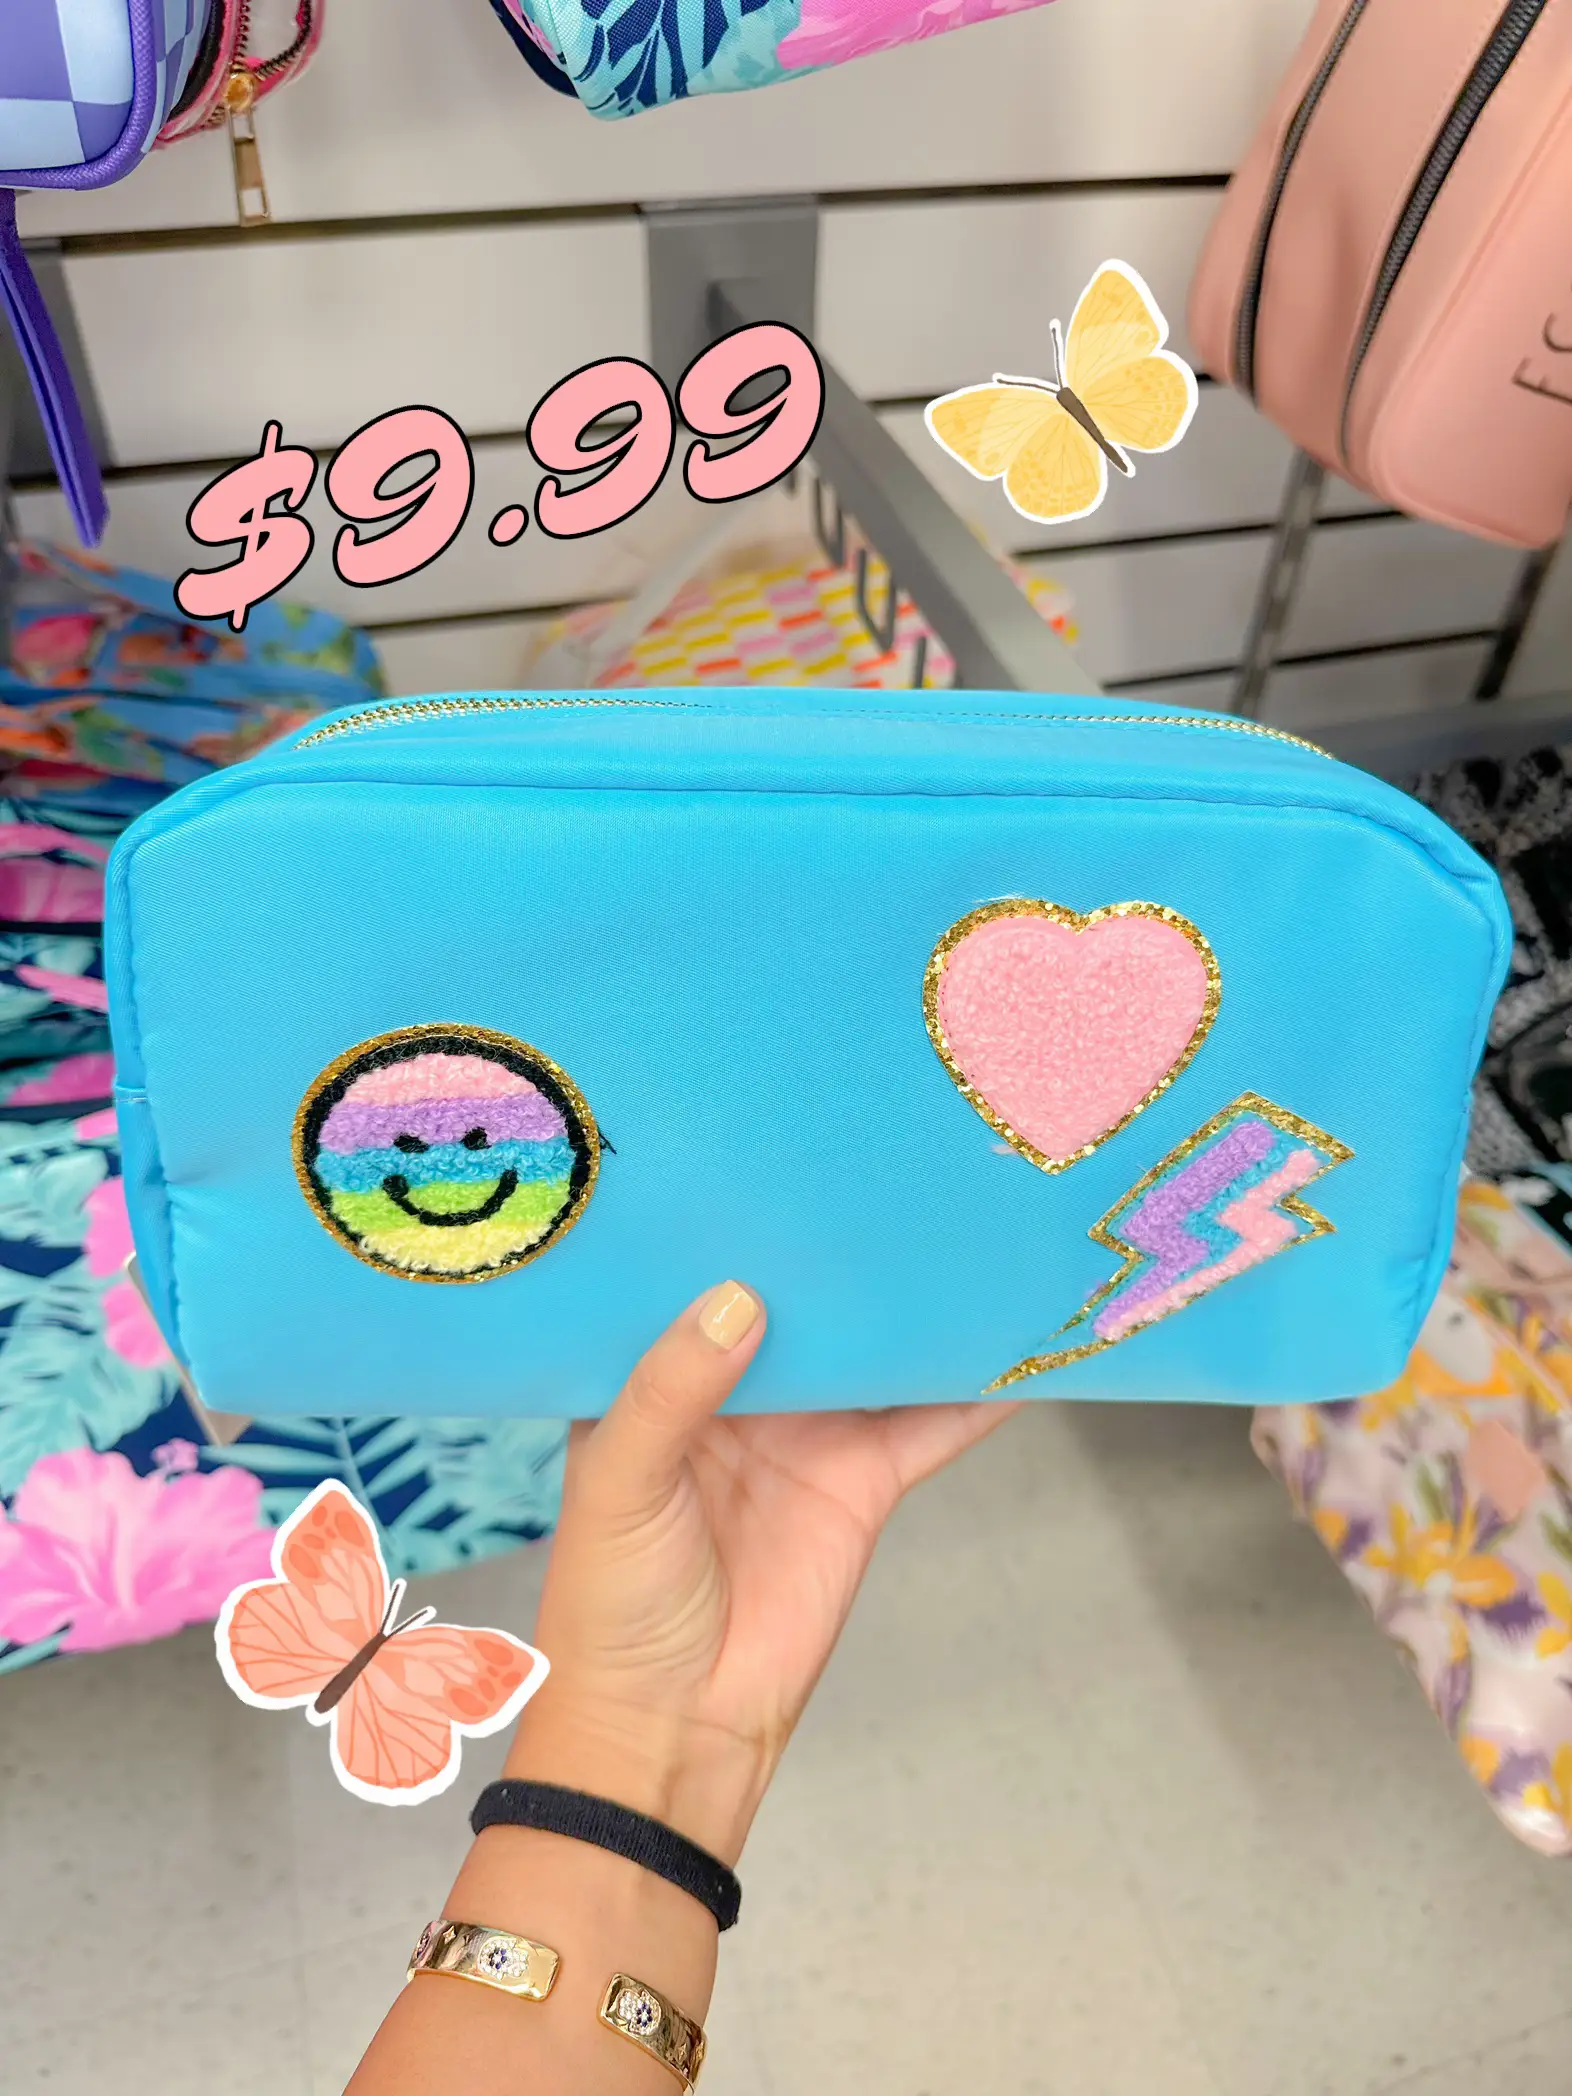 Makeup Bag 💄, Gallery posted by Cyn ♡, FL